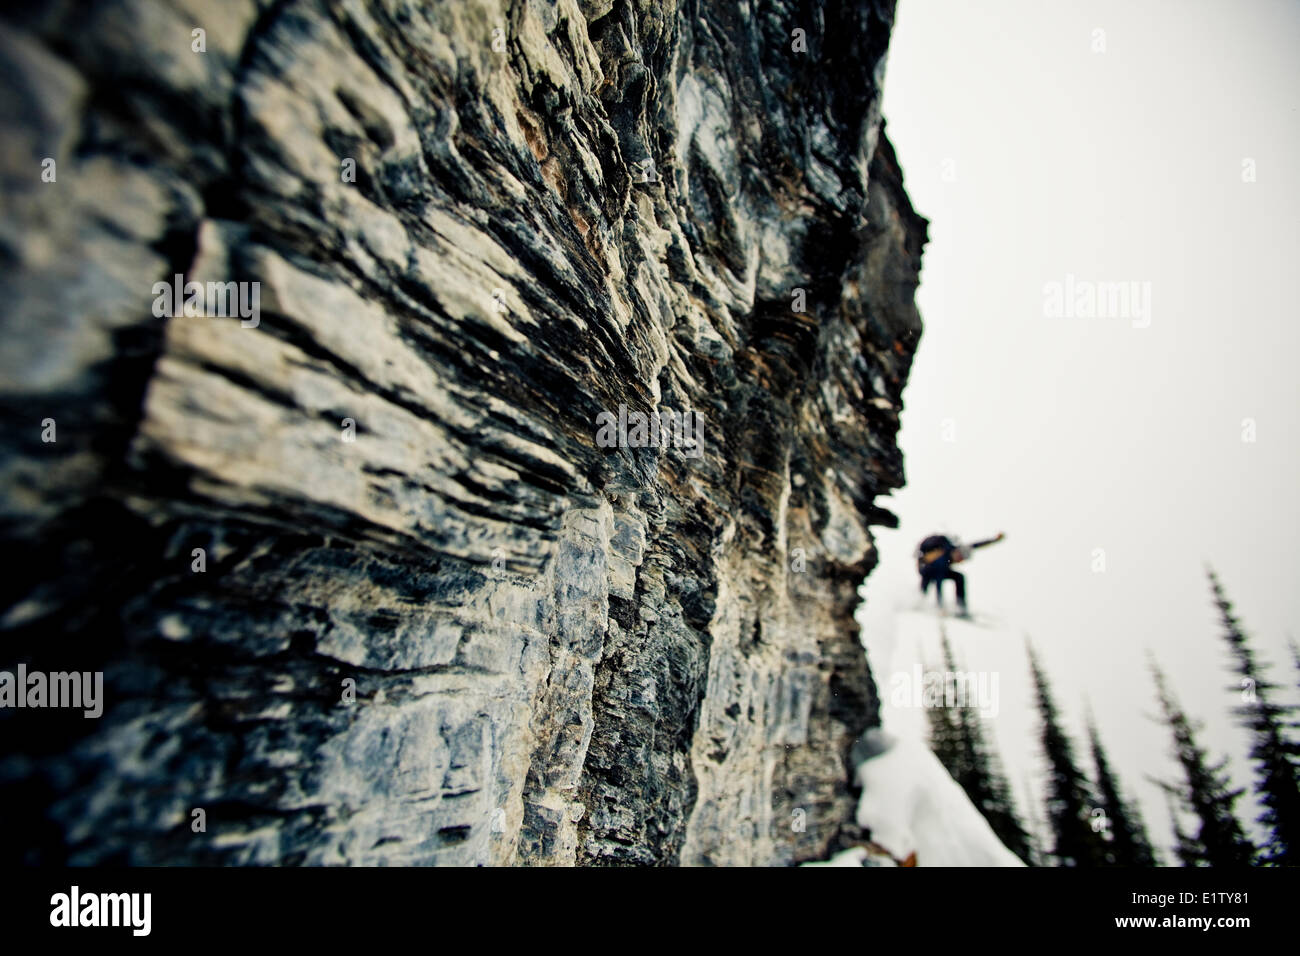 A man dropping a cliff on his splitboard. Revelstoke Mtn Resort Backcountry, BC Stock Photo